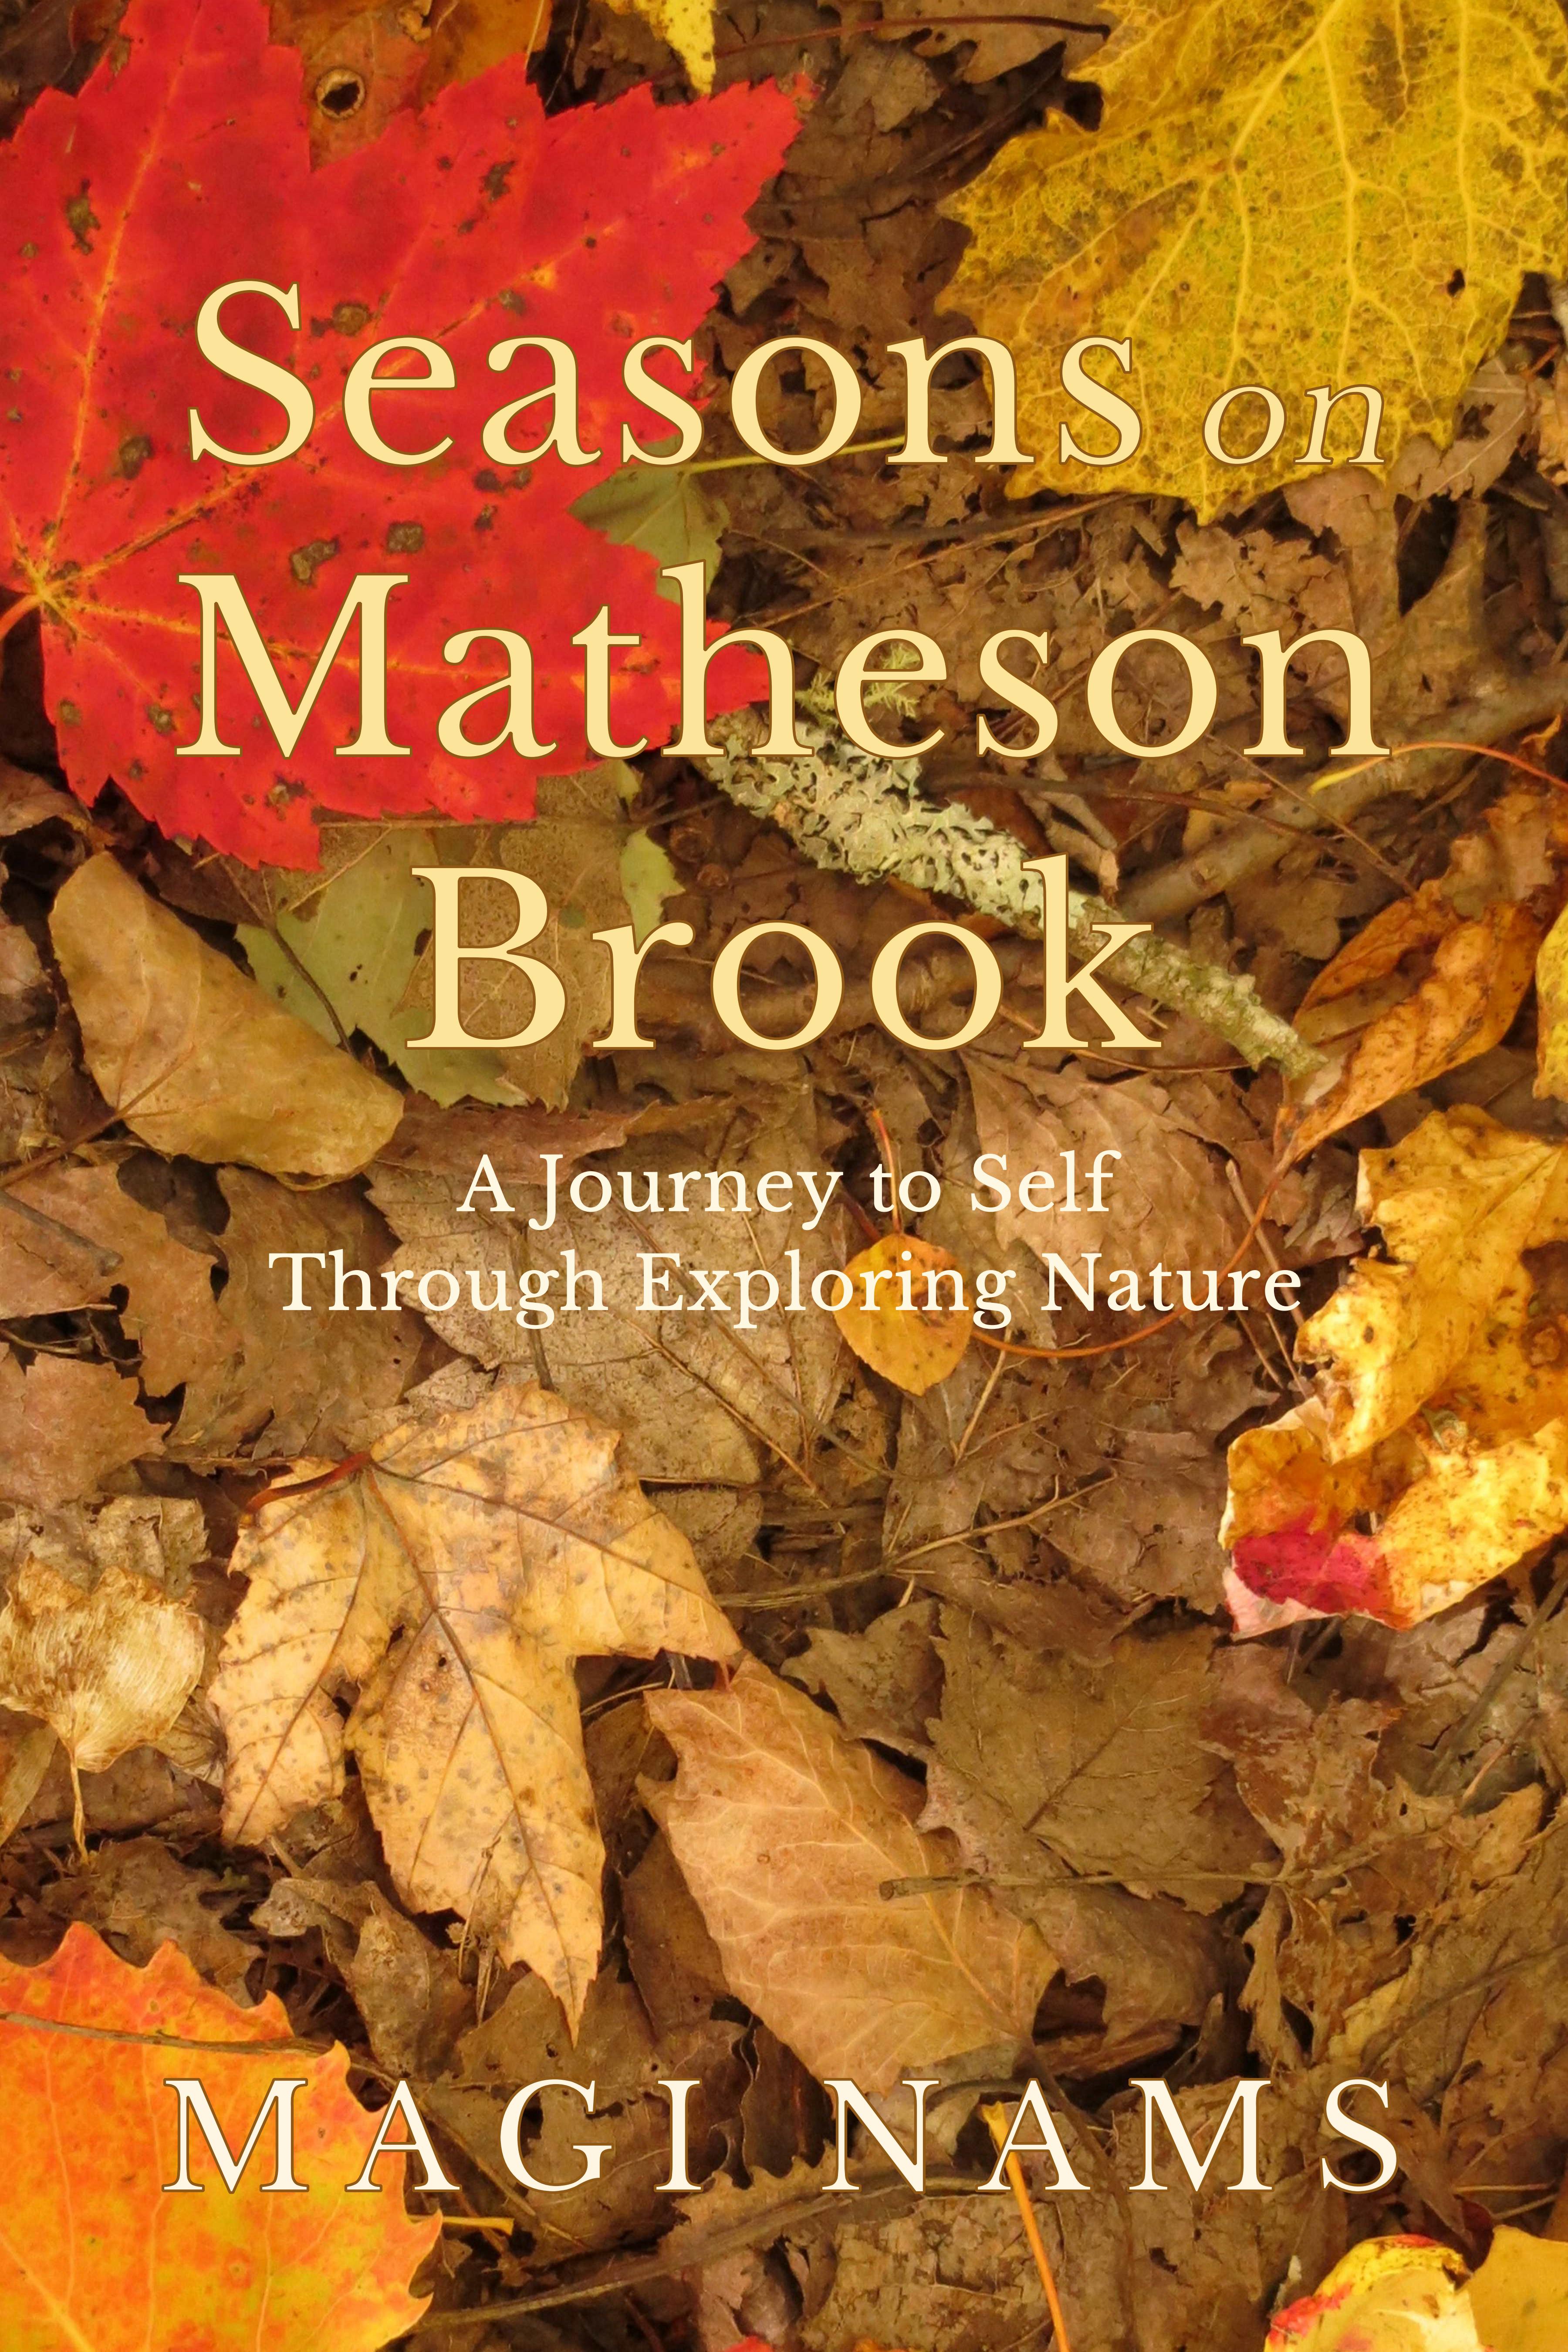 NEW! Seasons on Matheson Brook is now available in paperback and ebook formats. Click on image below for book details.